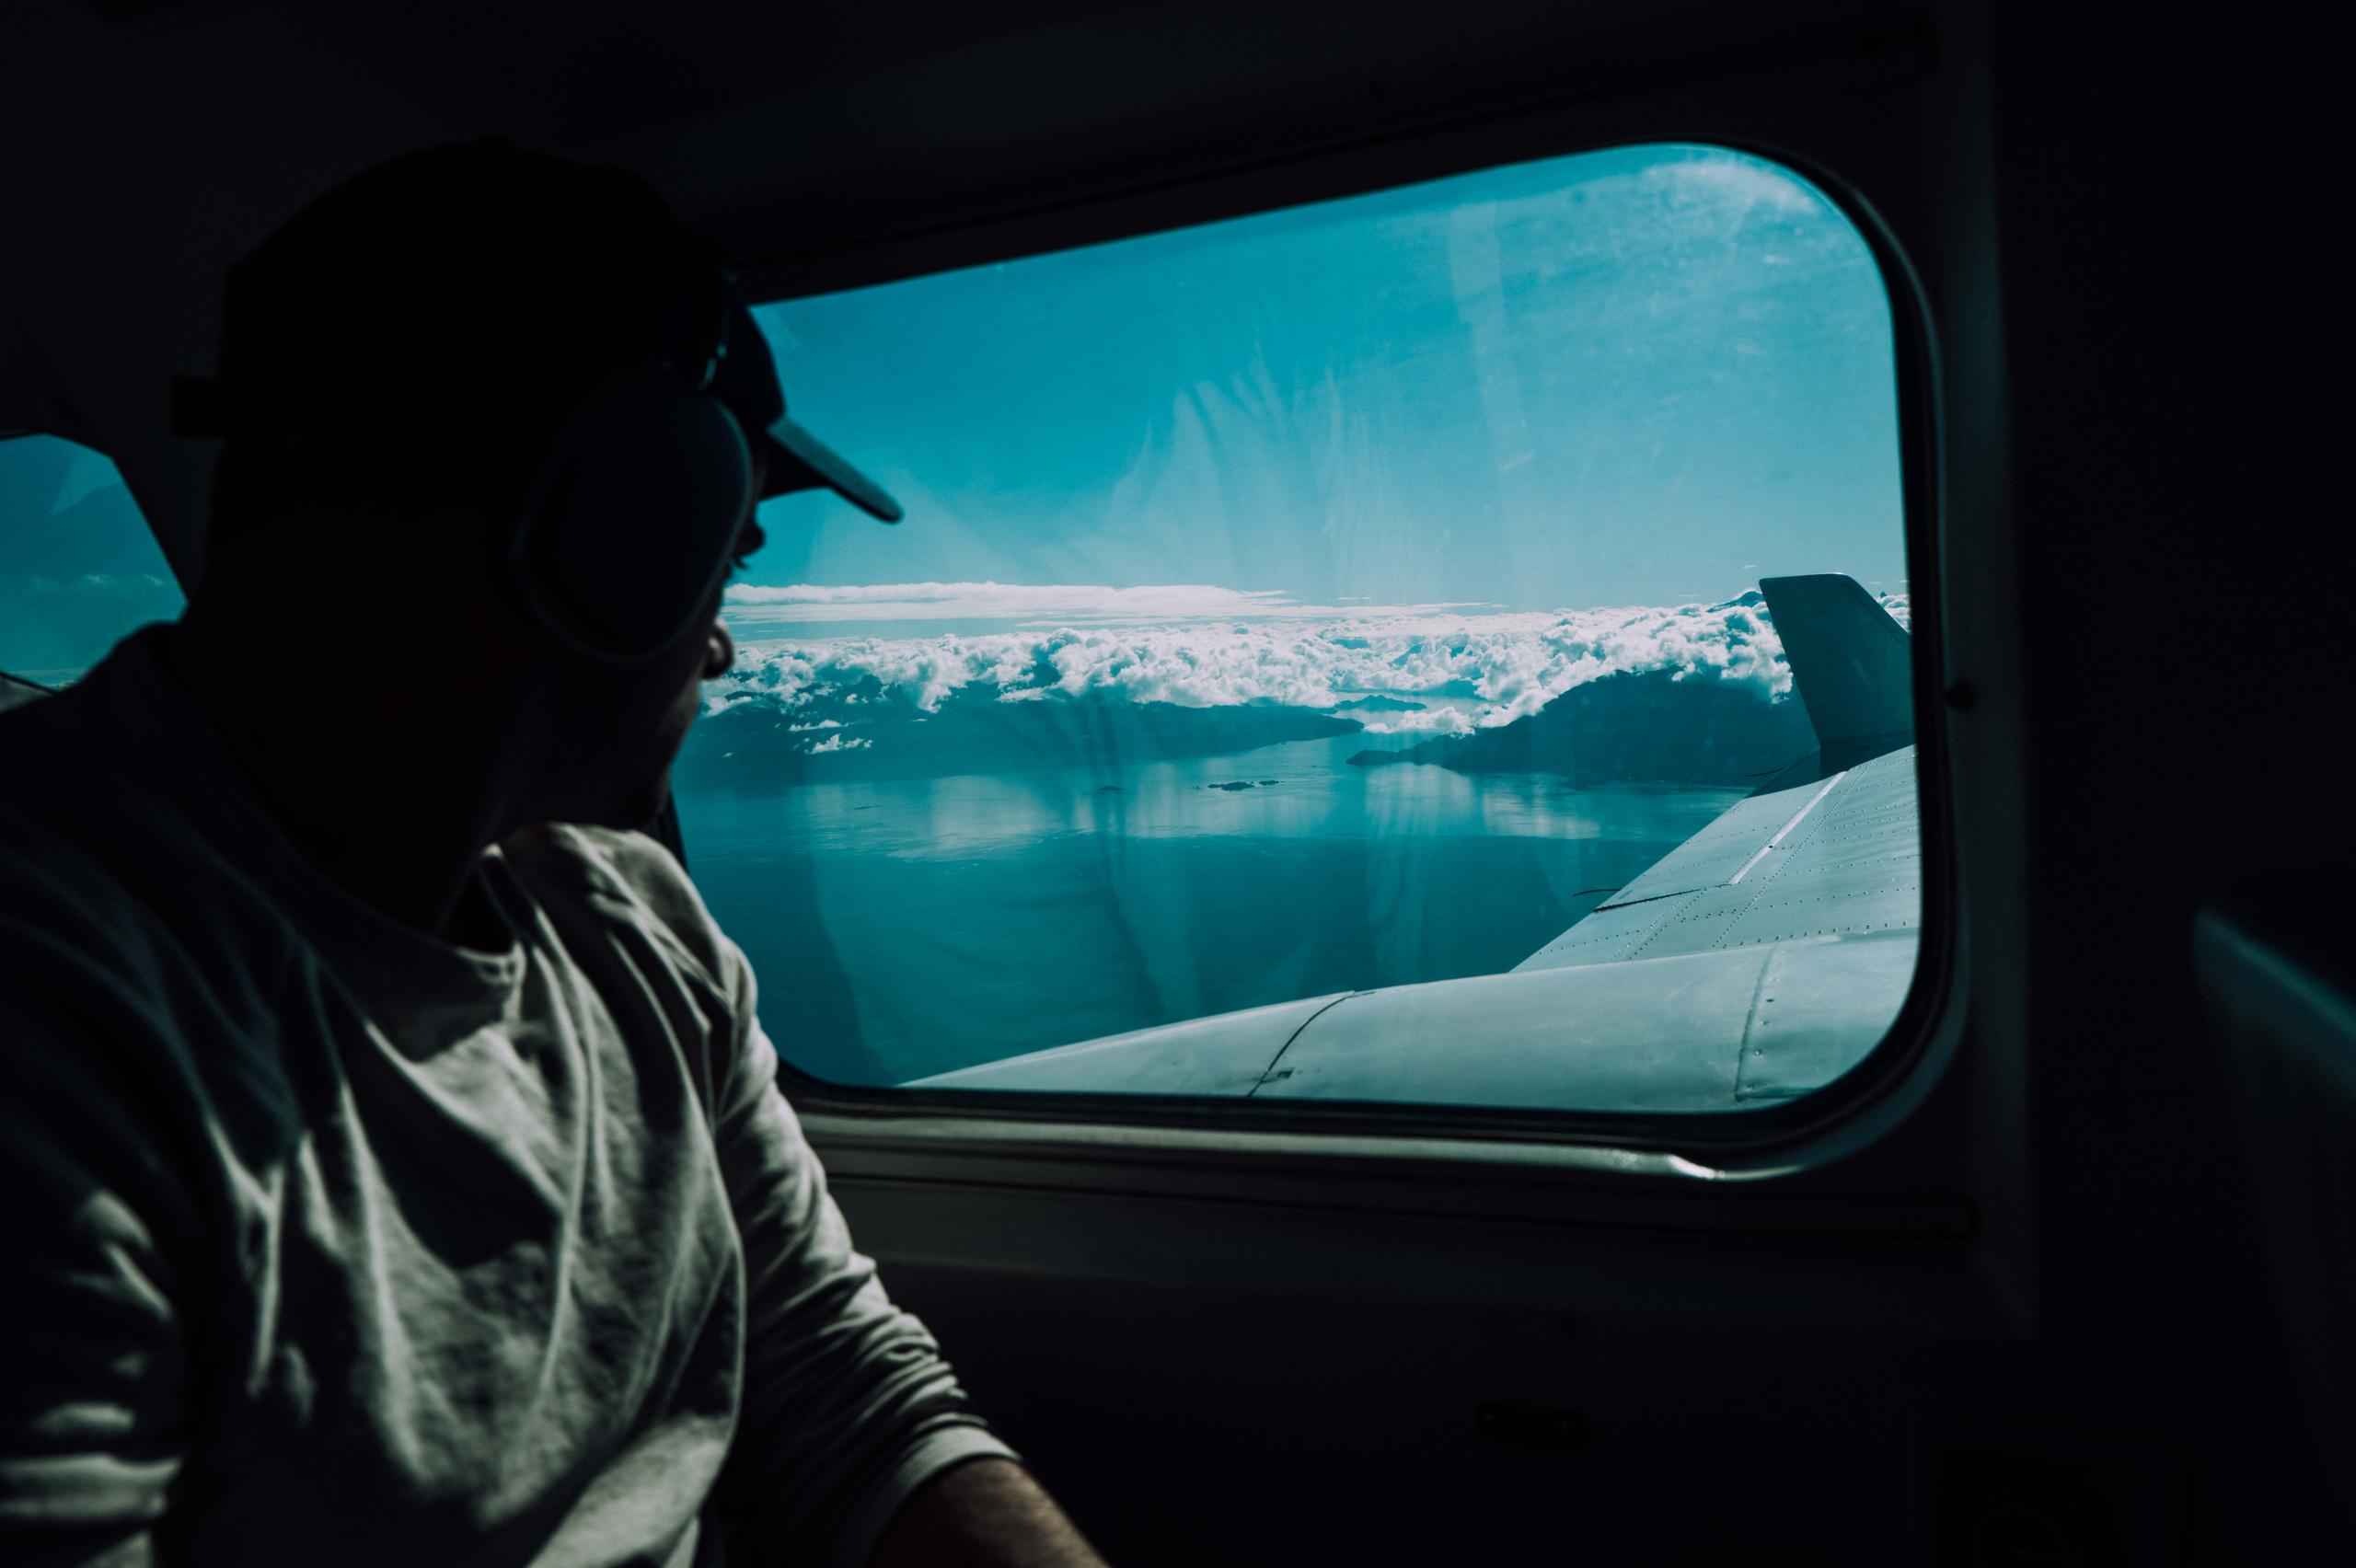 Man in plane overlooking Patagonia landscape and lake